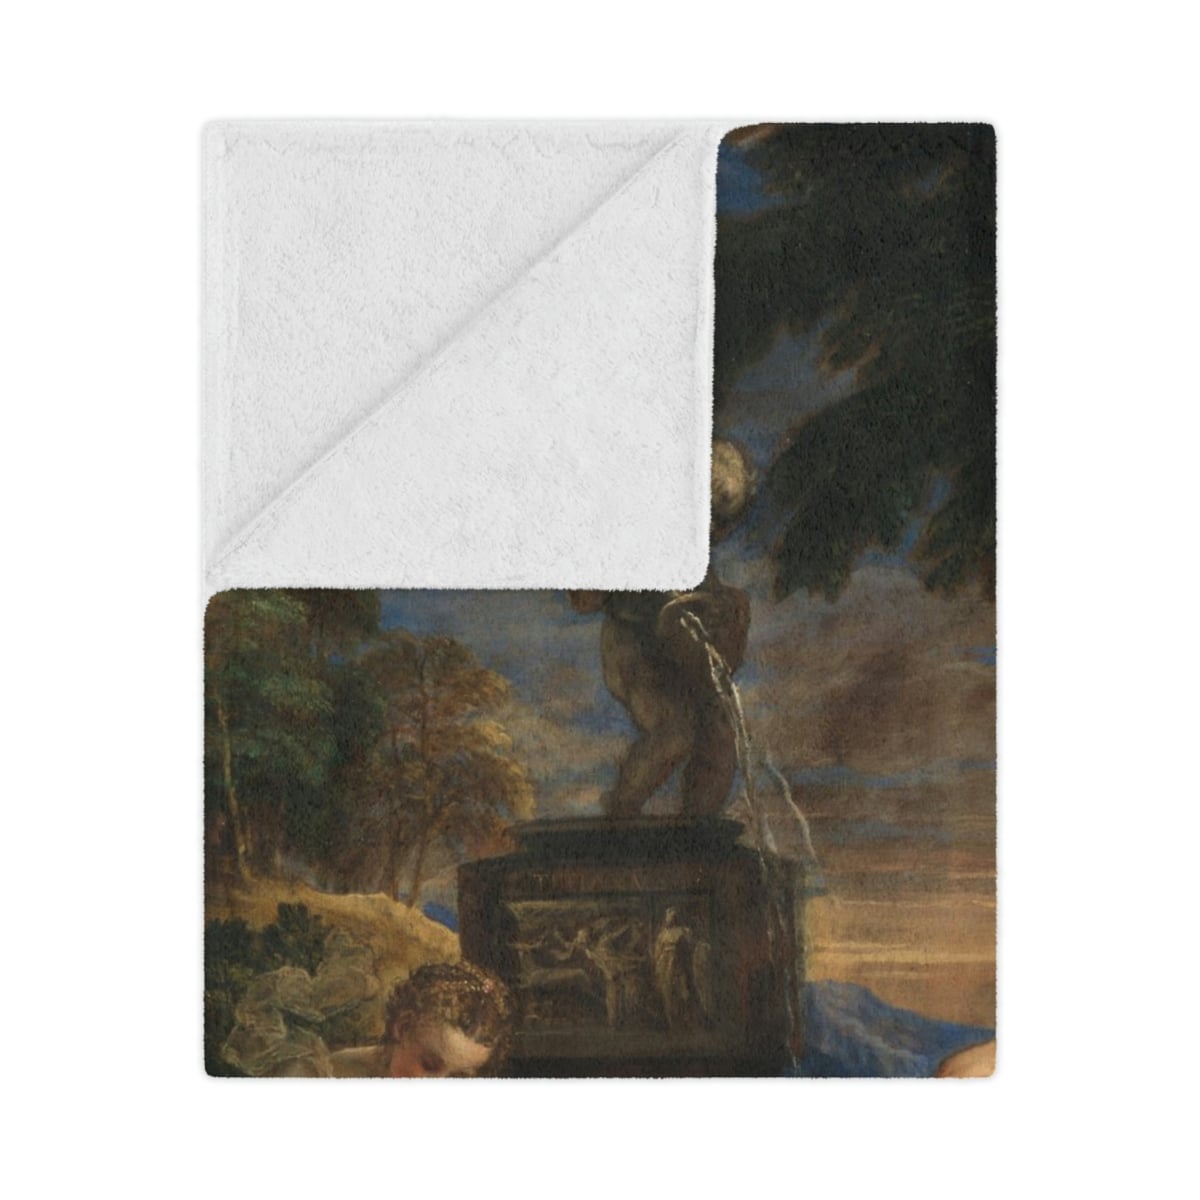 Titian’s Diana and Callisto Art Blanket - Classic Elegance for Home